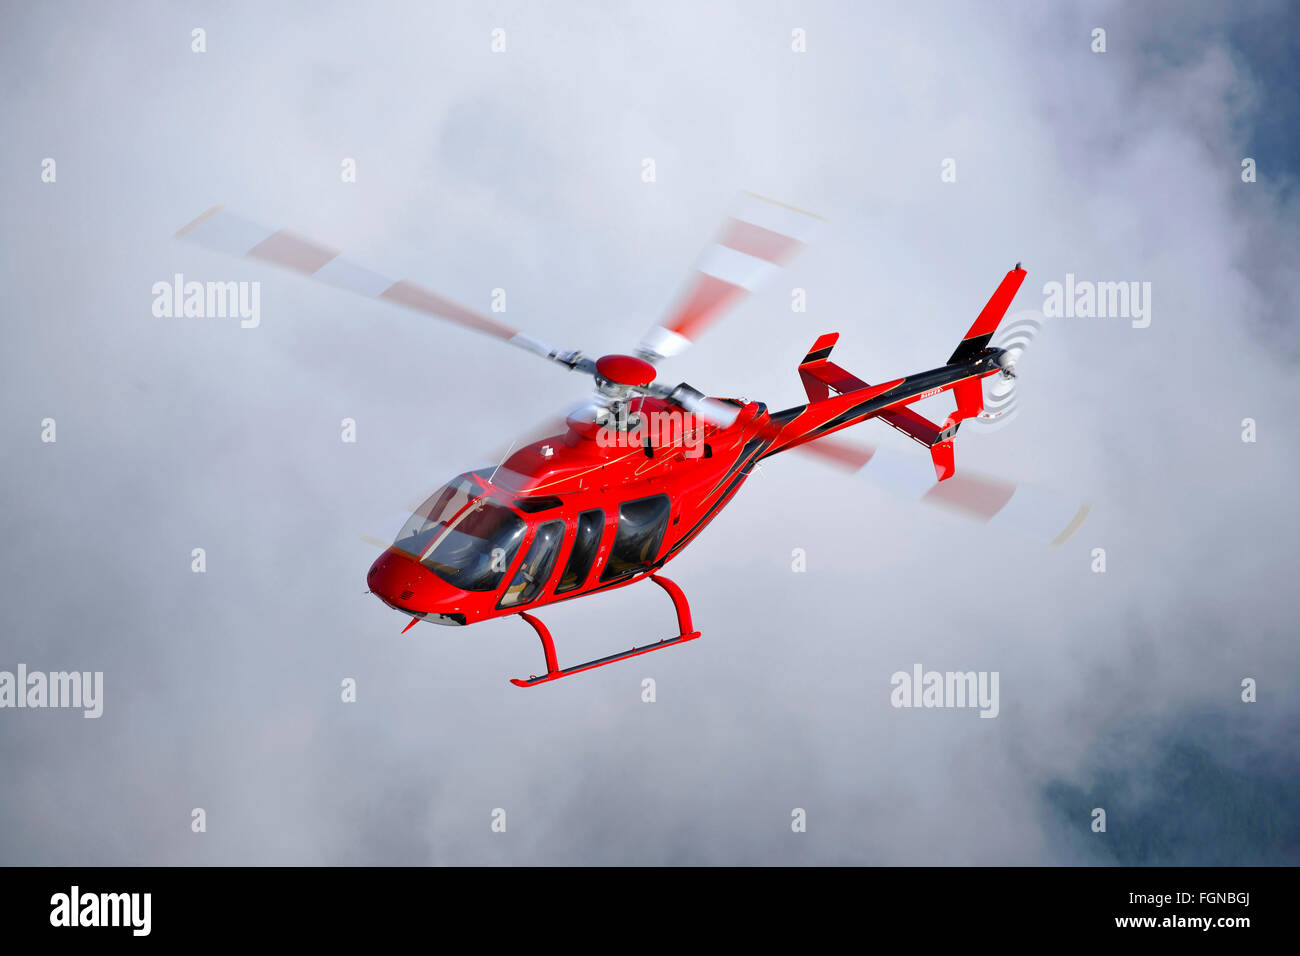 Helicopters photographed air-to-air Stock Photo